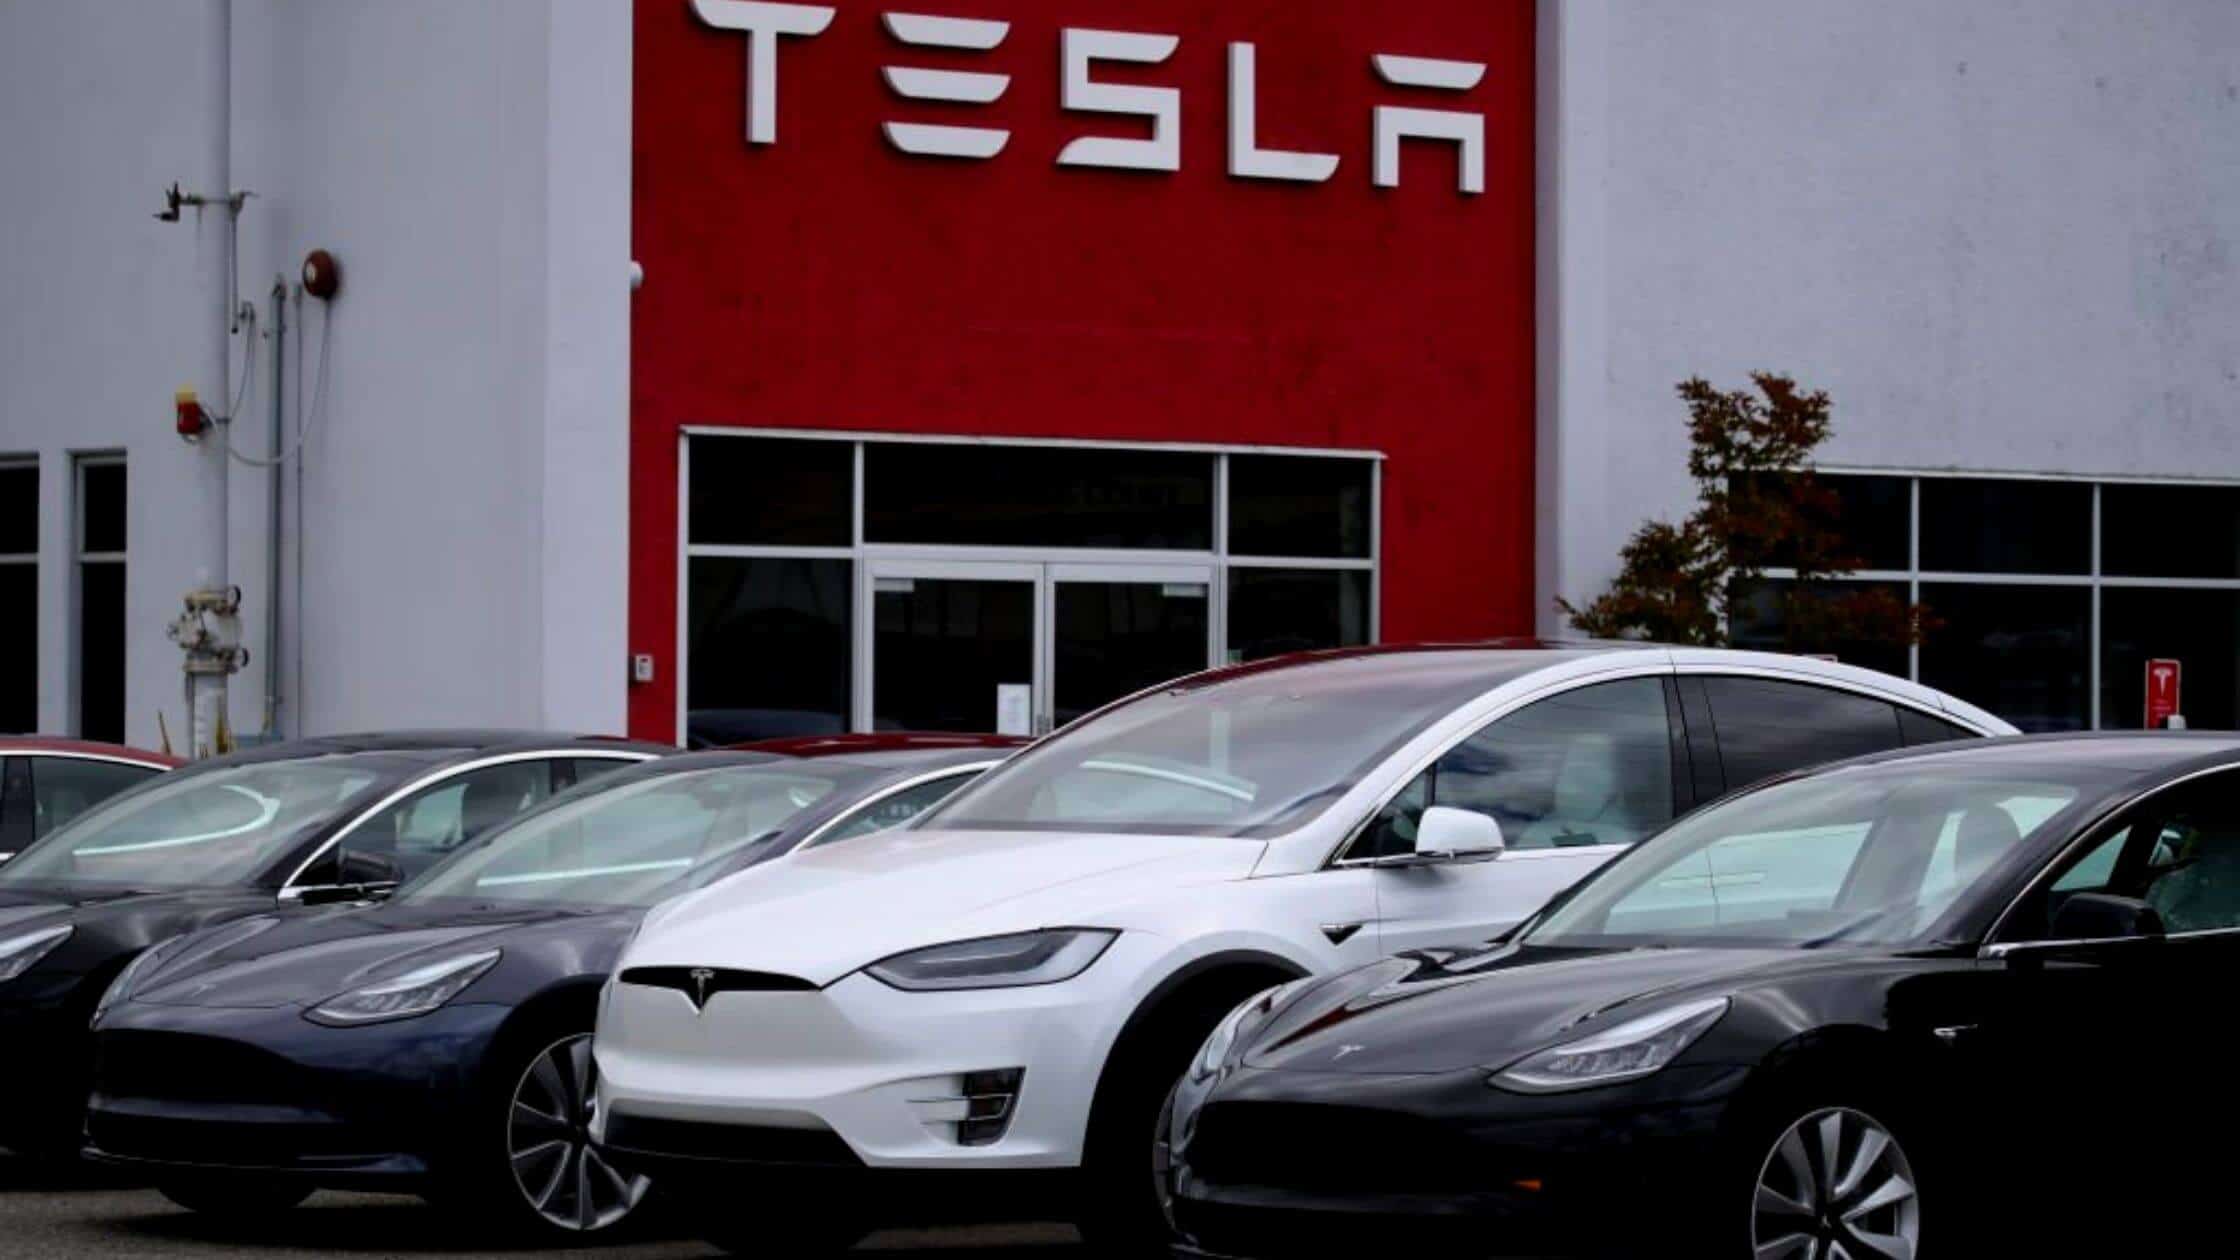 Cathie Wood's Ark Invest Purchases Tesla Stock On A Slump